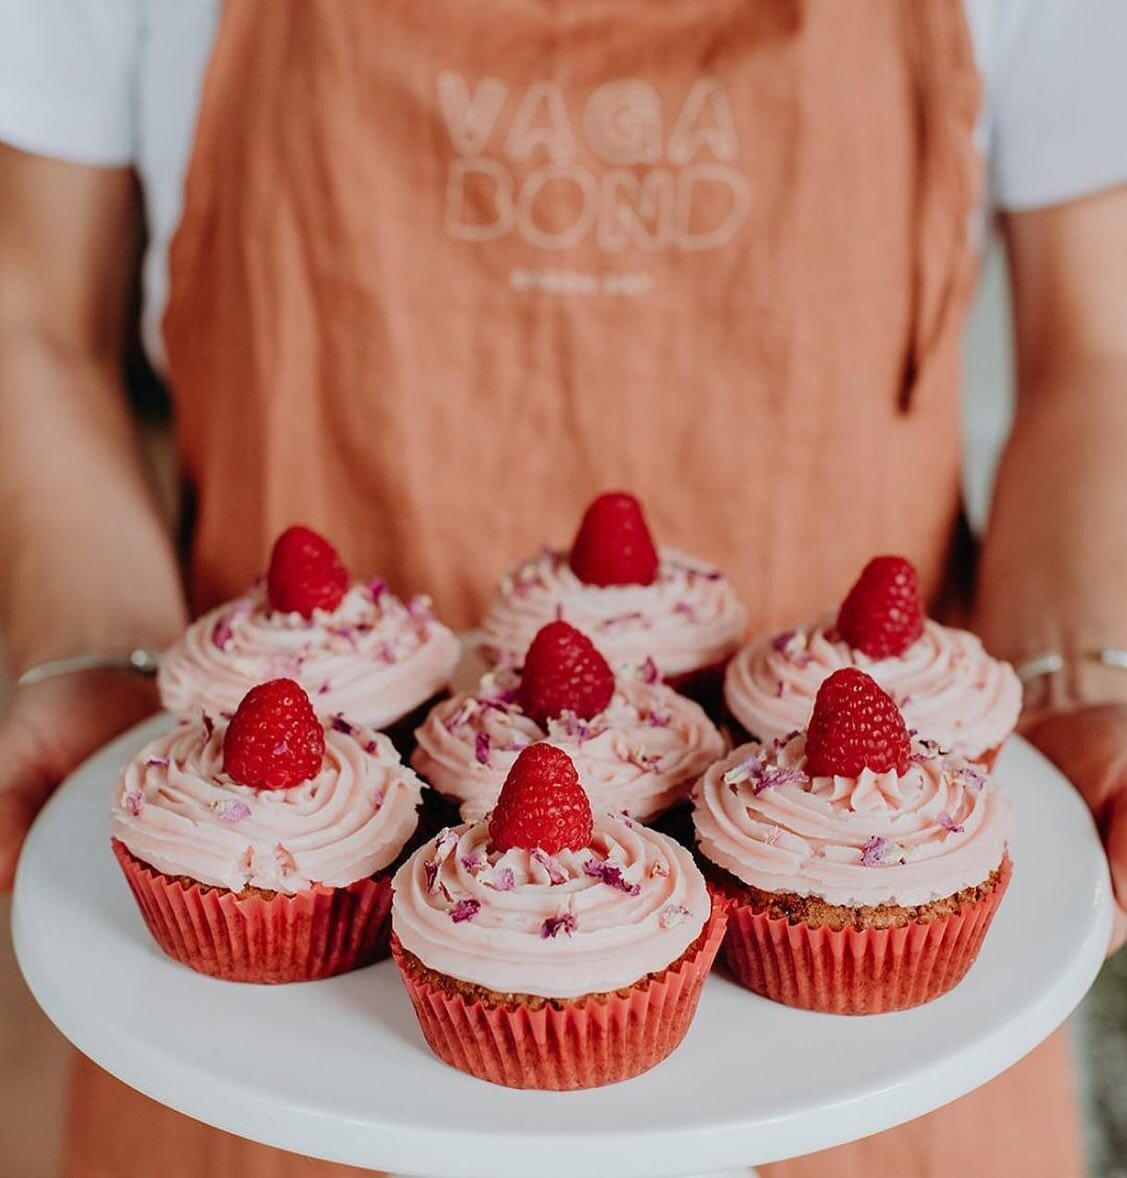 The B E S T cupcakes in town (and the best remedy for Tuesday blues!). Wholesome, plant-based, all natural ingredients&hellip;treat yourself! 🍓🧁🌈 

@vagabondbyronbay 

______
#habitatbyronbay #vagabondbyronbay #ByronBay #cupcakes #plantbased